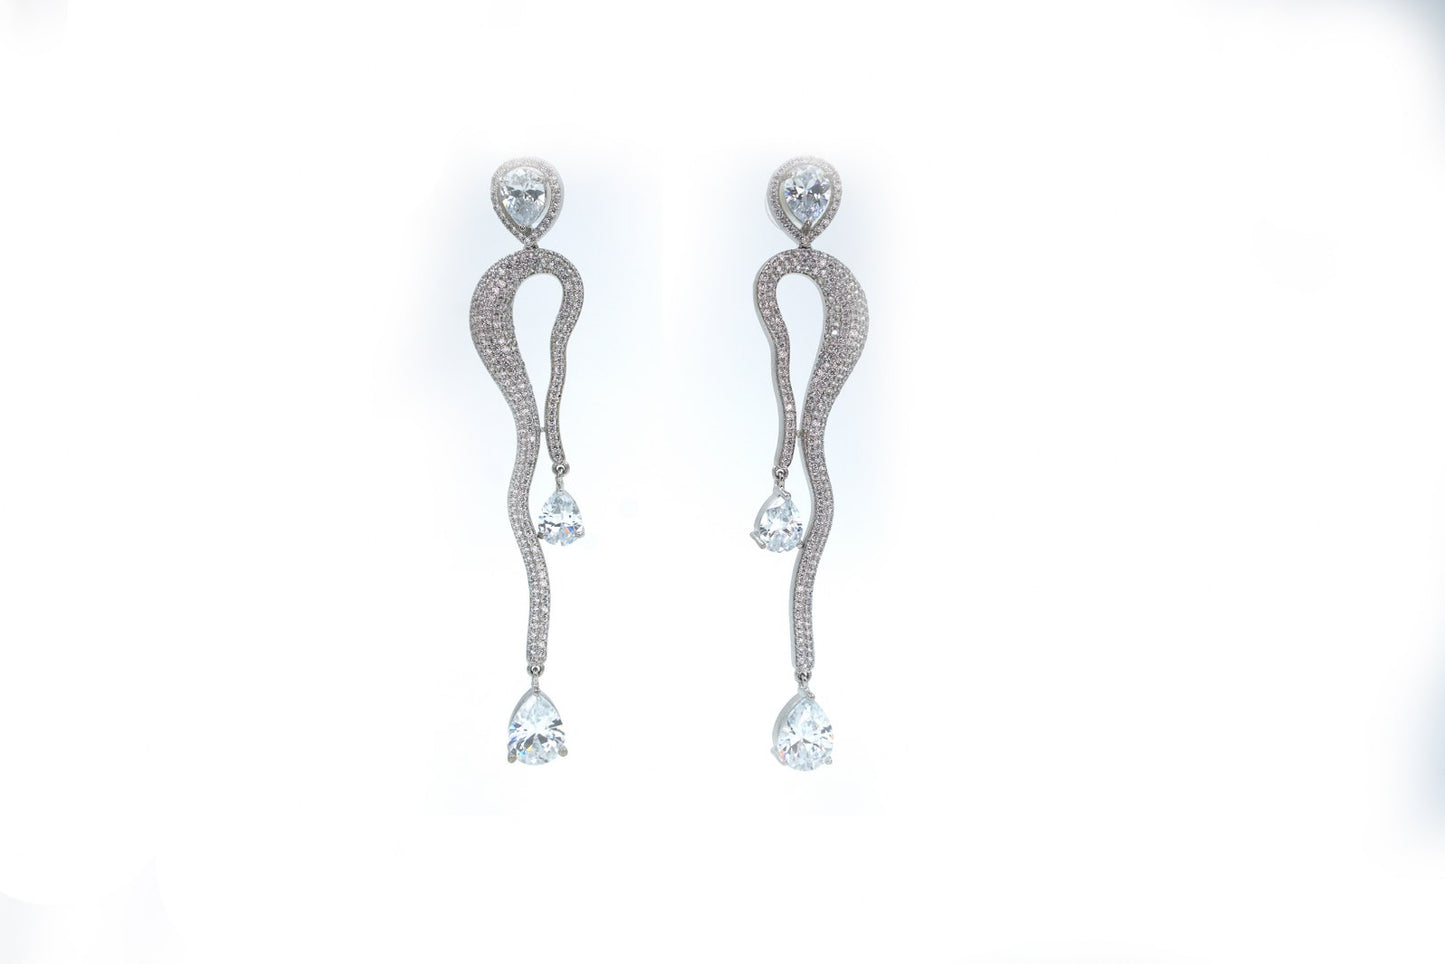 DESIGNER AD EARRINGS WITH SILVER COLOUR RHODIUM PLATING